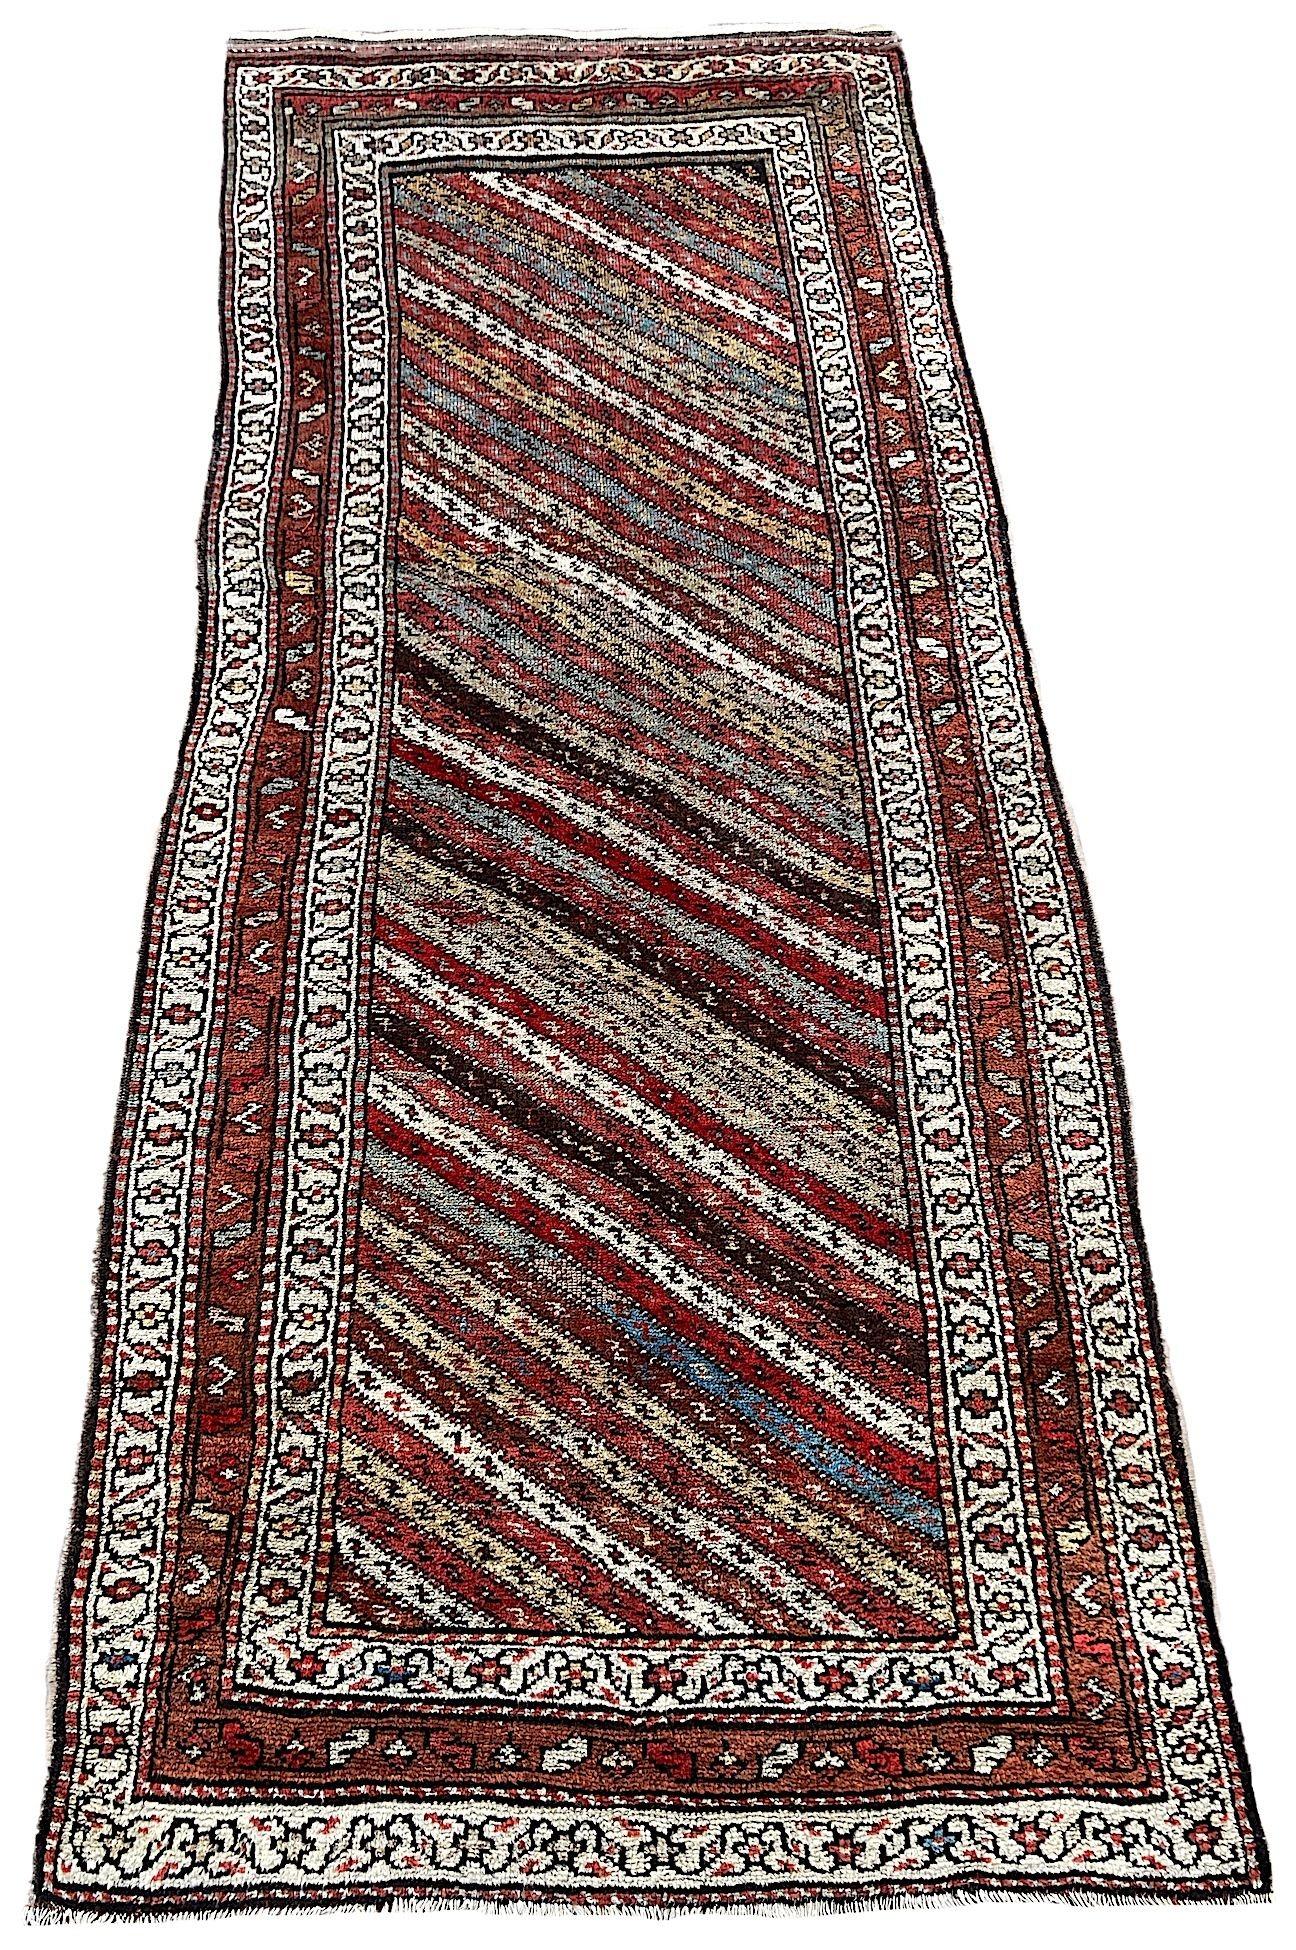 A beautiful antique Kurdish runner, hand woven circa 1900. The design features a series of multicoloured diagonal bands surrounded by a border of stylised flowers and vines. Woven with soft, velvety wool and lovely secondary colours of reds, greens,